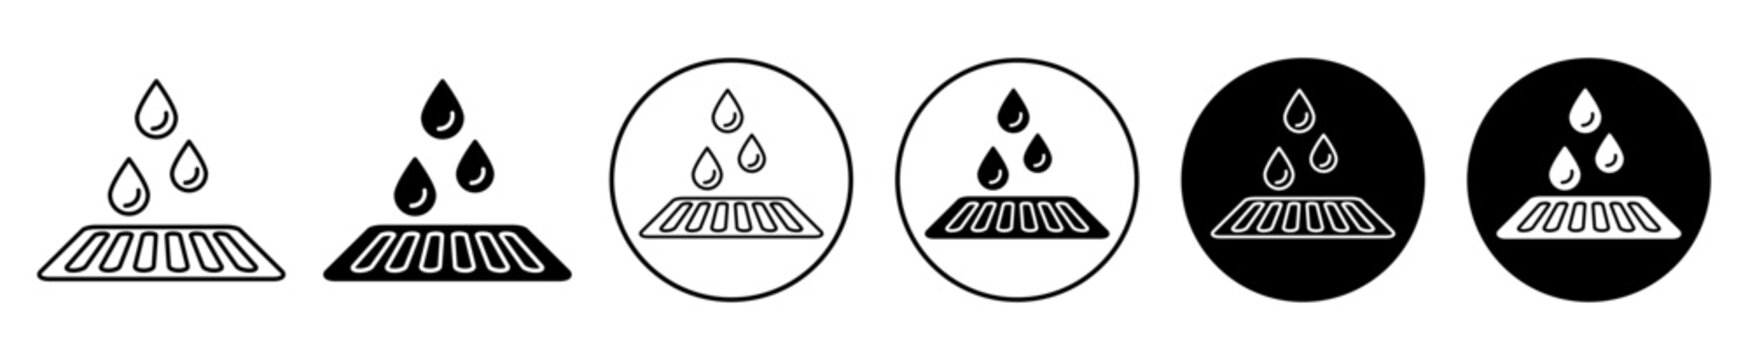 Drain icon set. sewer rain water drainage vector symbol in black filled and outlined style.